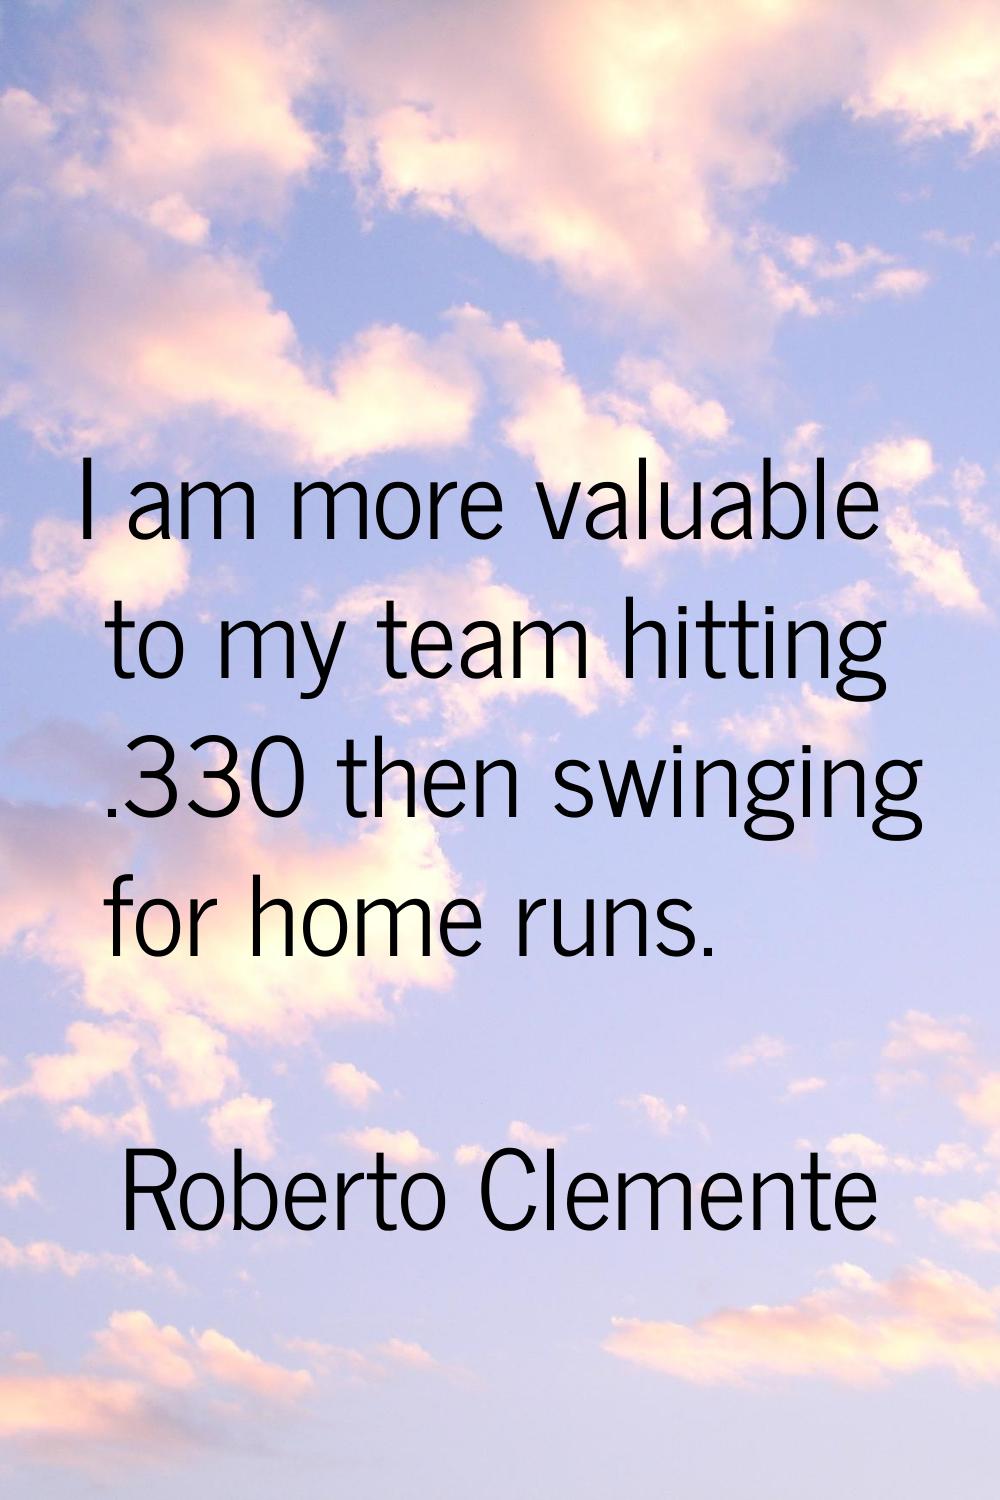 I am more valuable to my team hitting .330 then swinging for home runs.